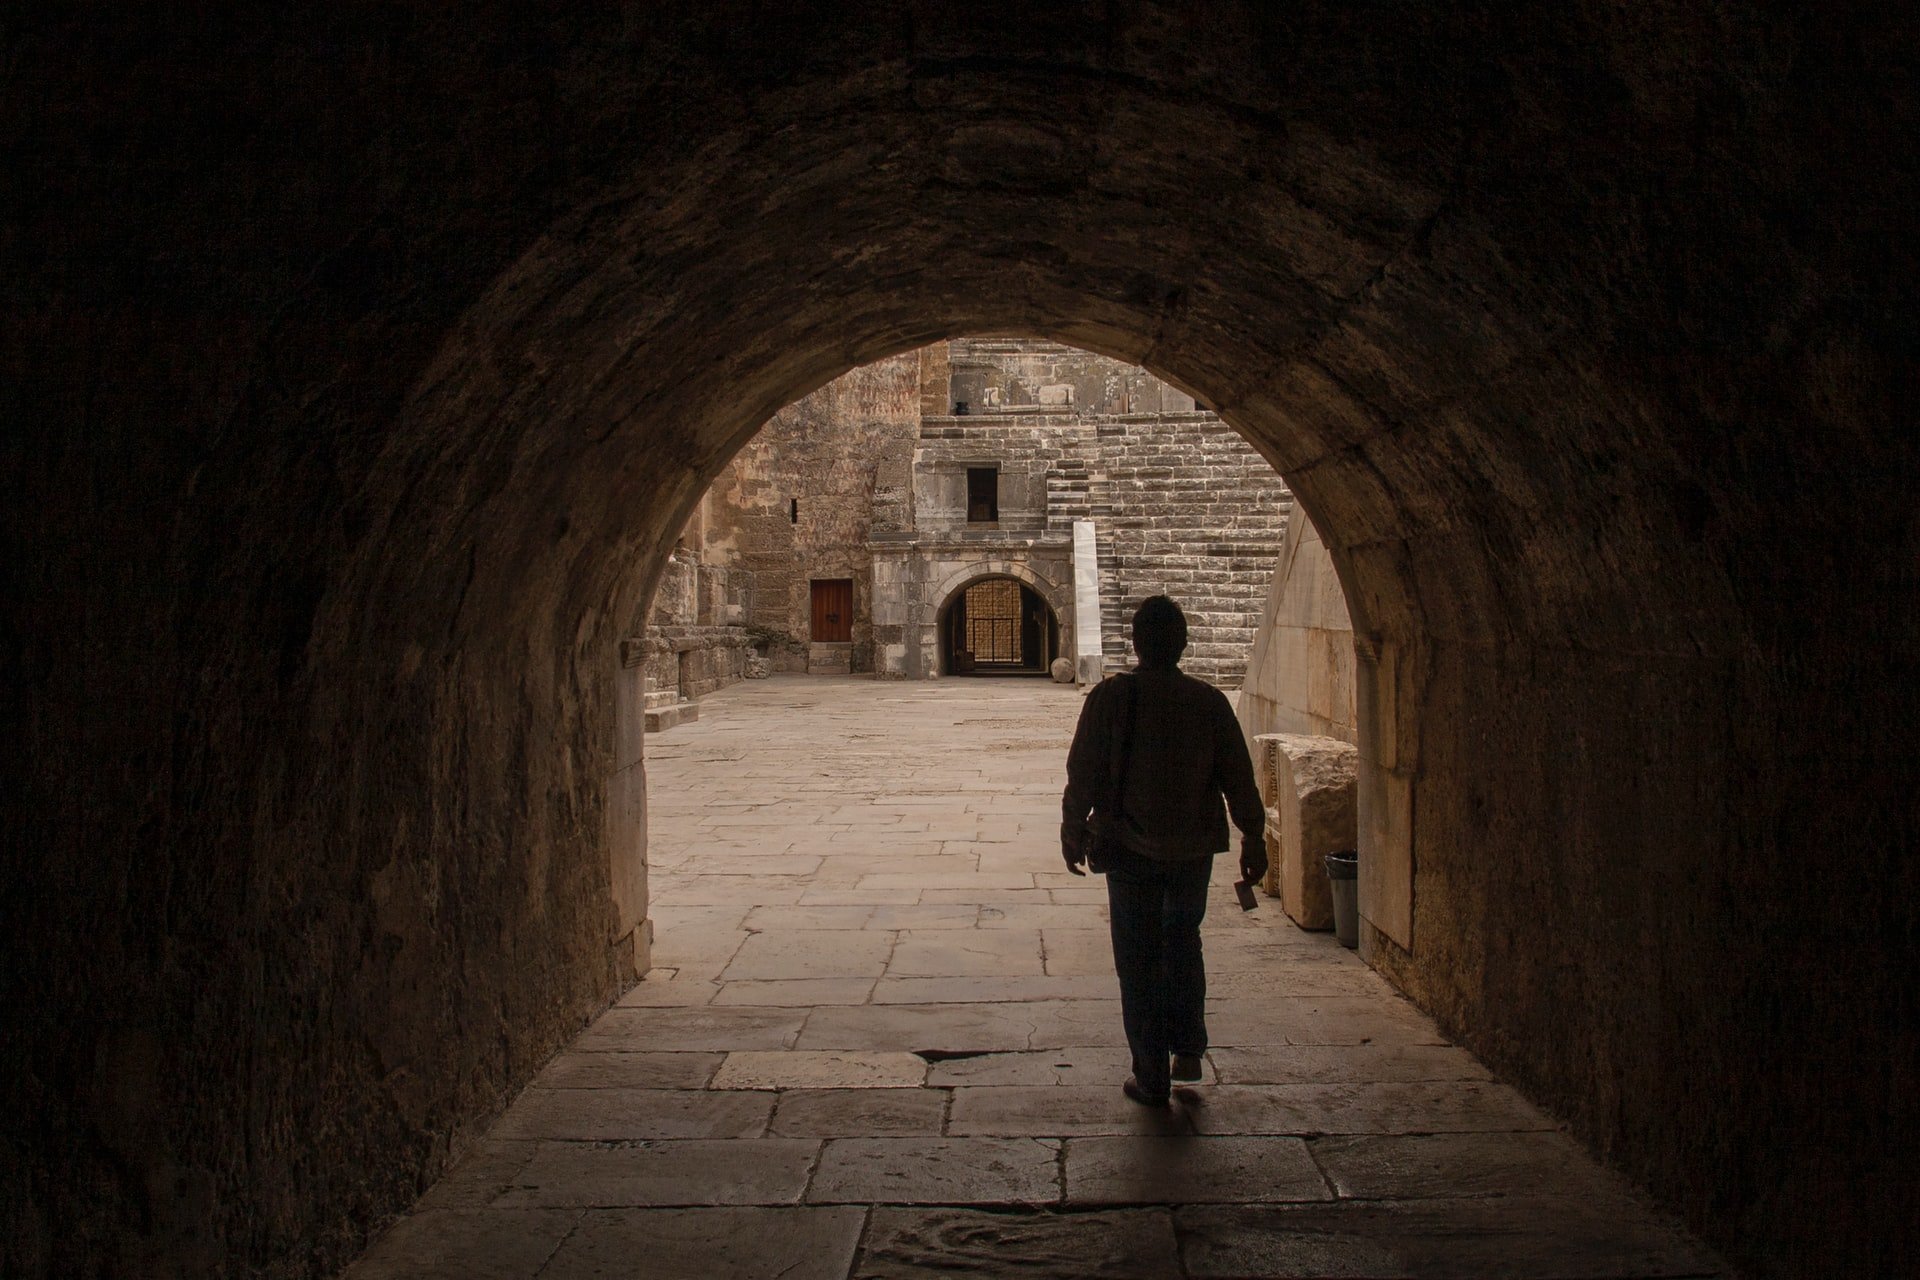 This image shows a man walking under an arched passageway in Aspendos theater.